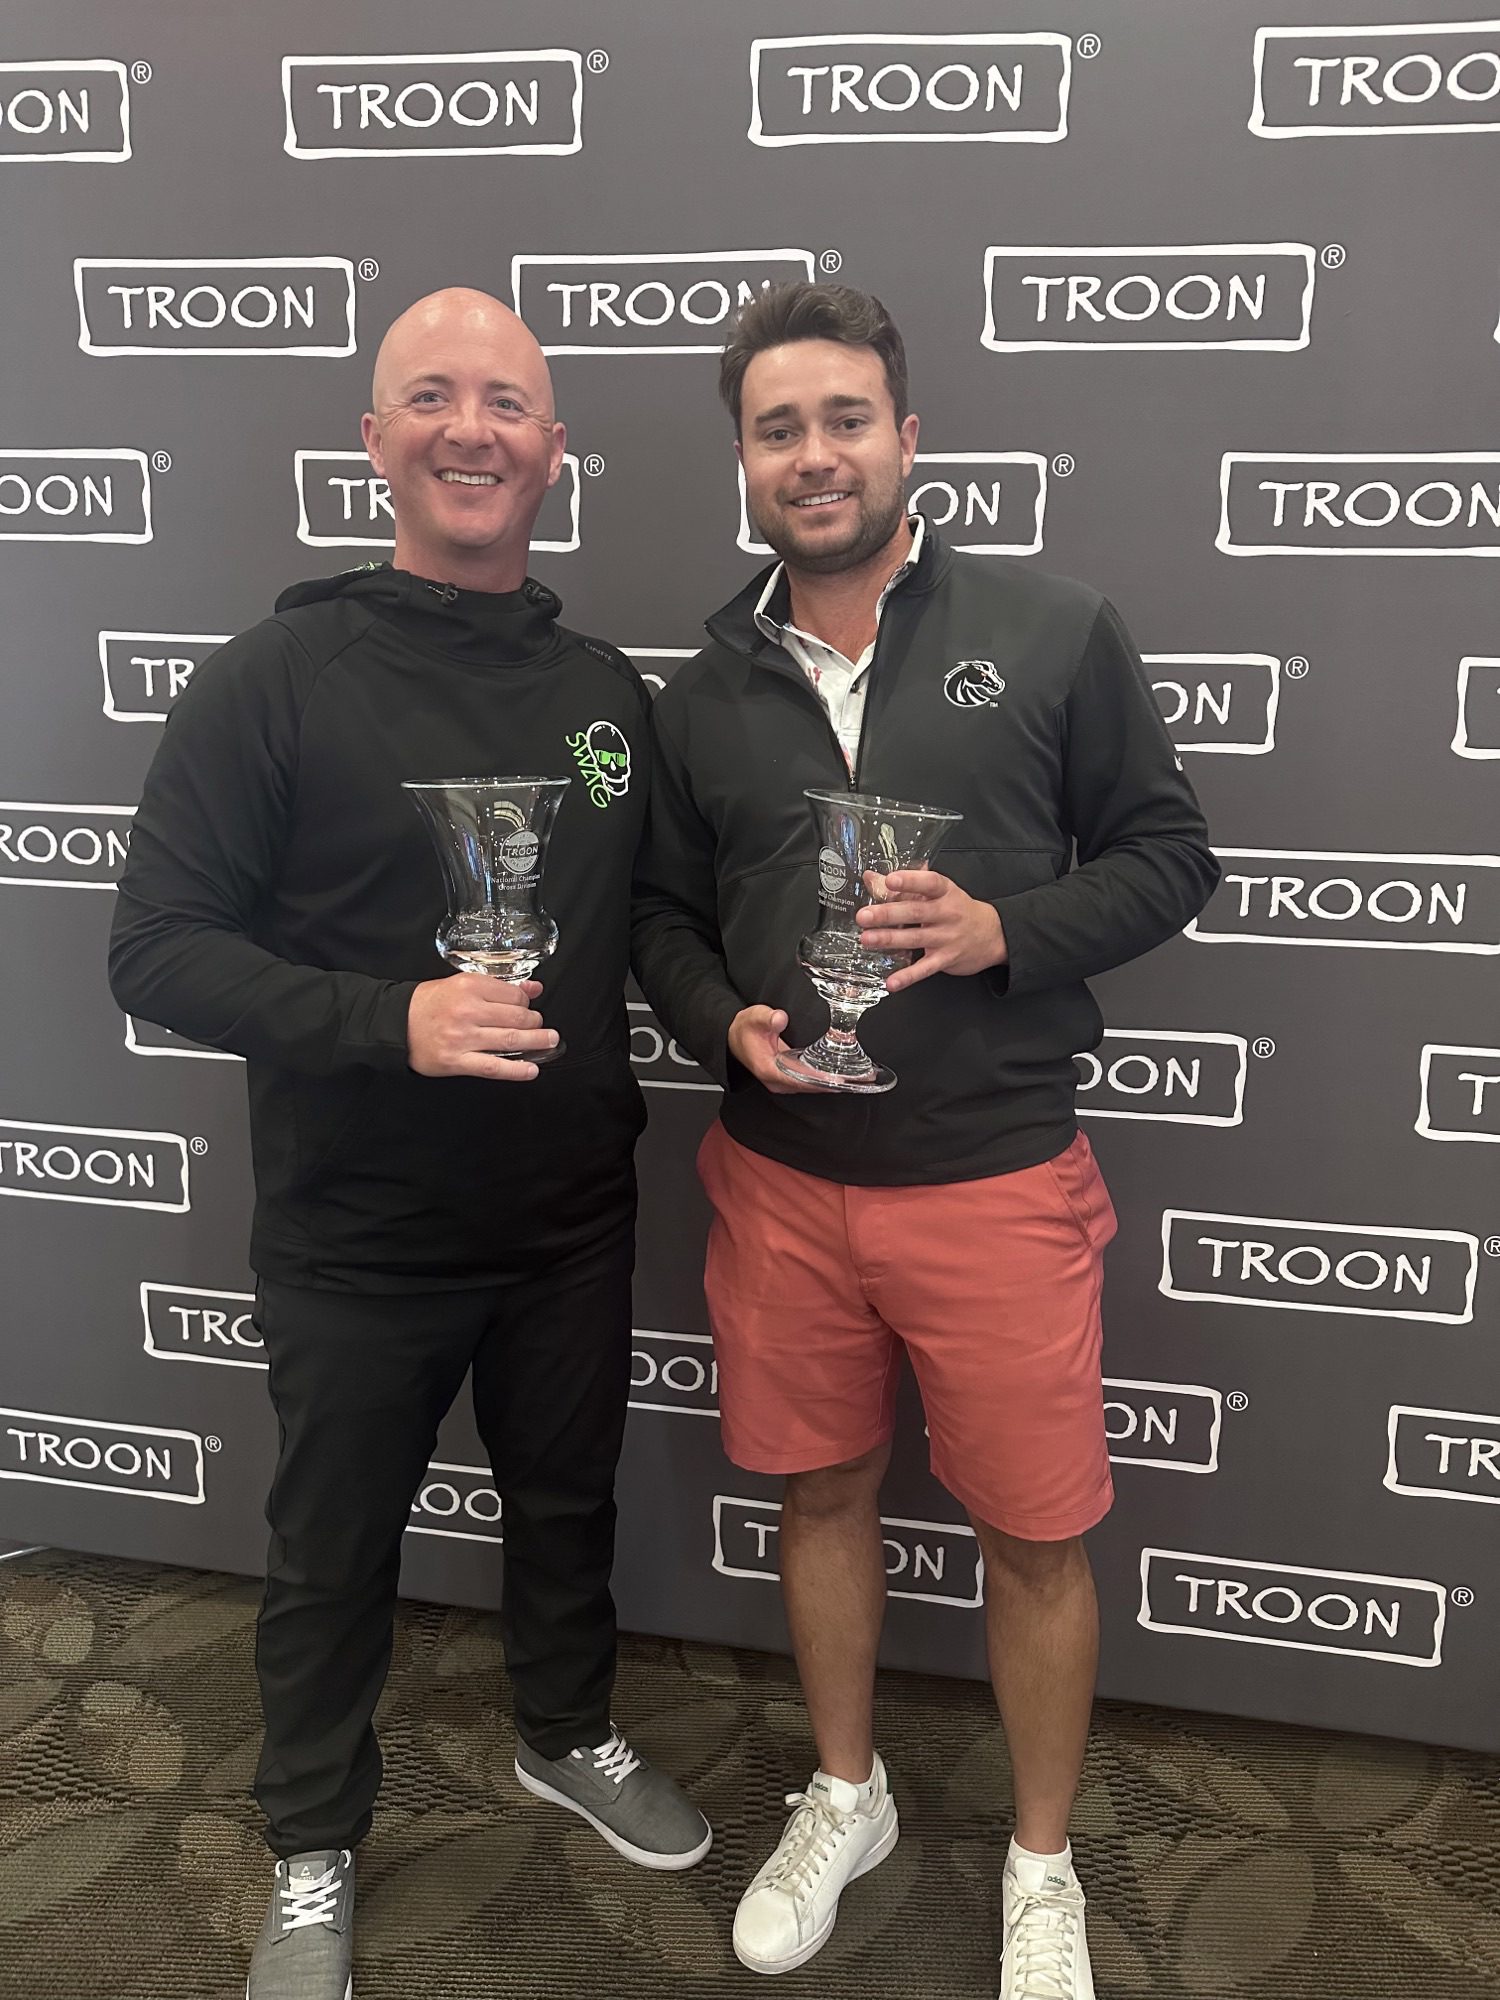 2022 TROON CHALLENGE NATIONAL FINALS CONCLUDE WITH EXCITING FINISH IN